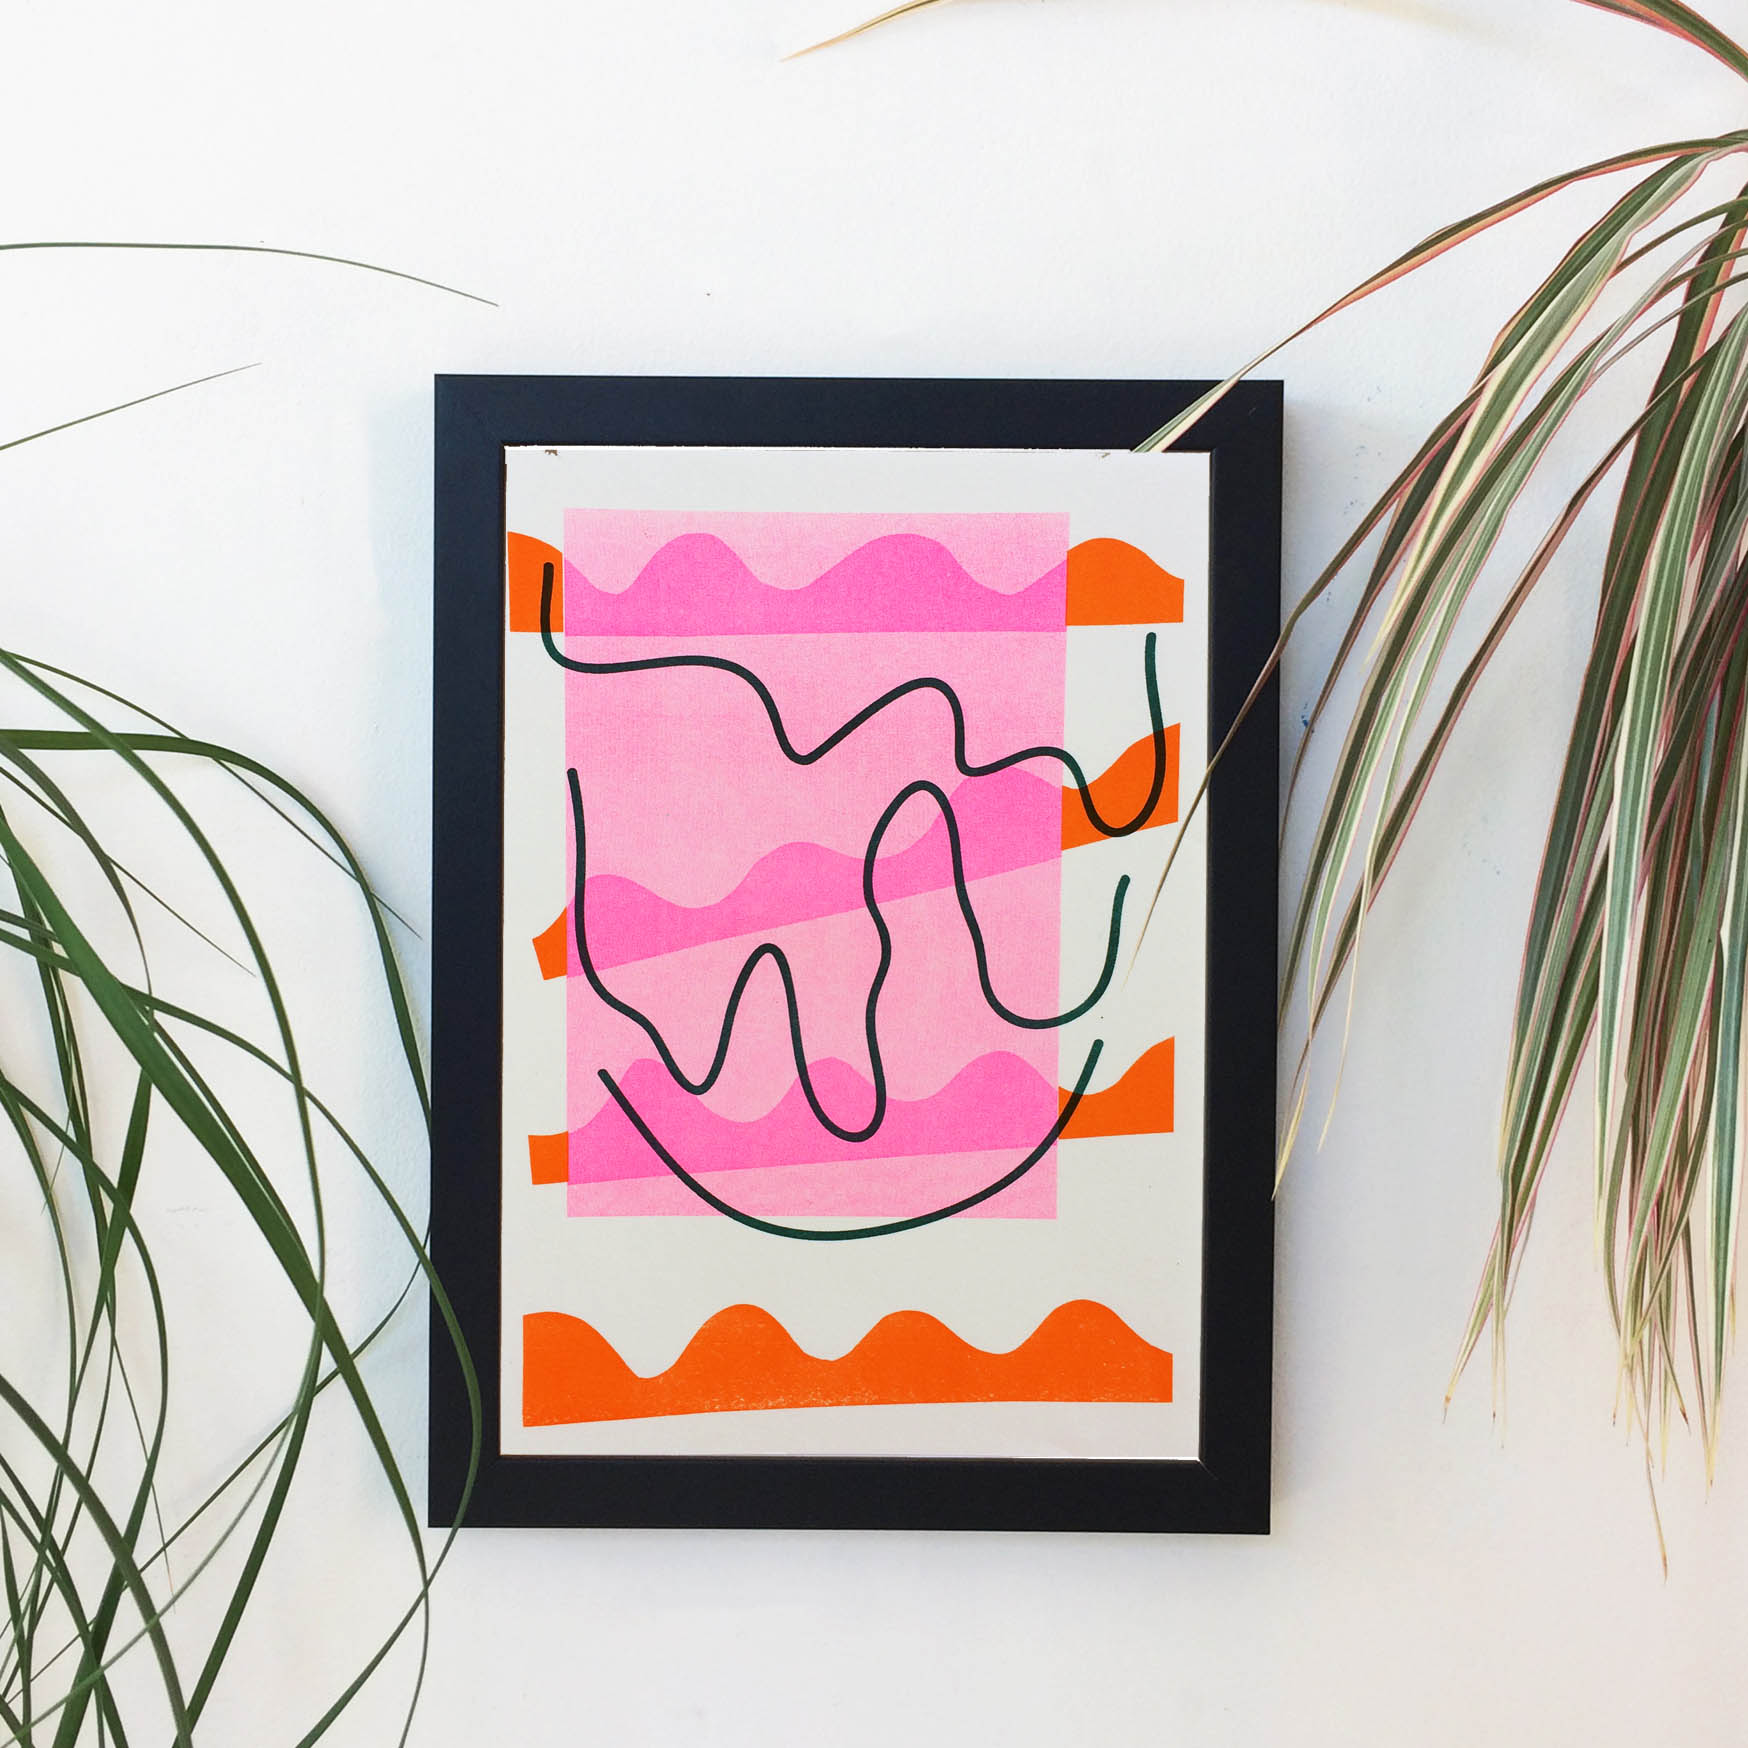 An abstract wiggly print in a frame in orange pink and teal